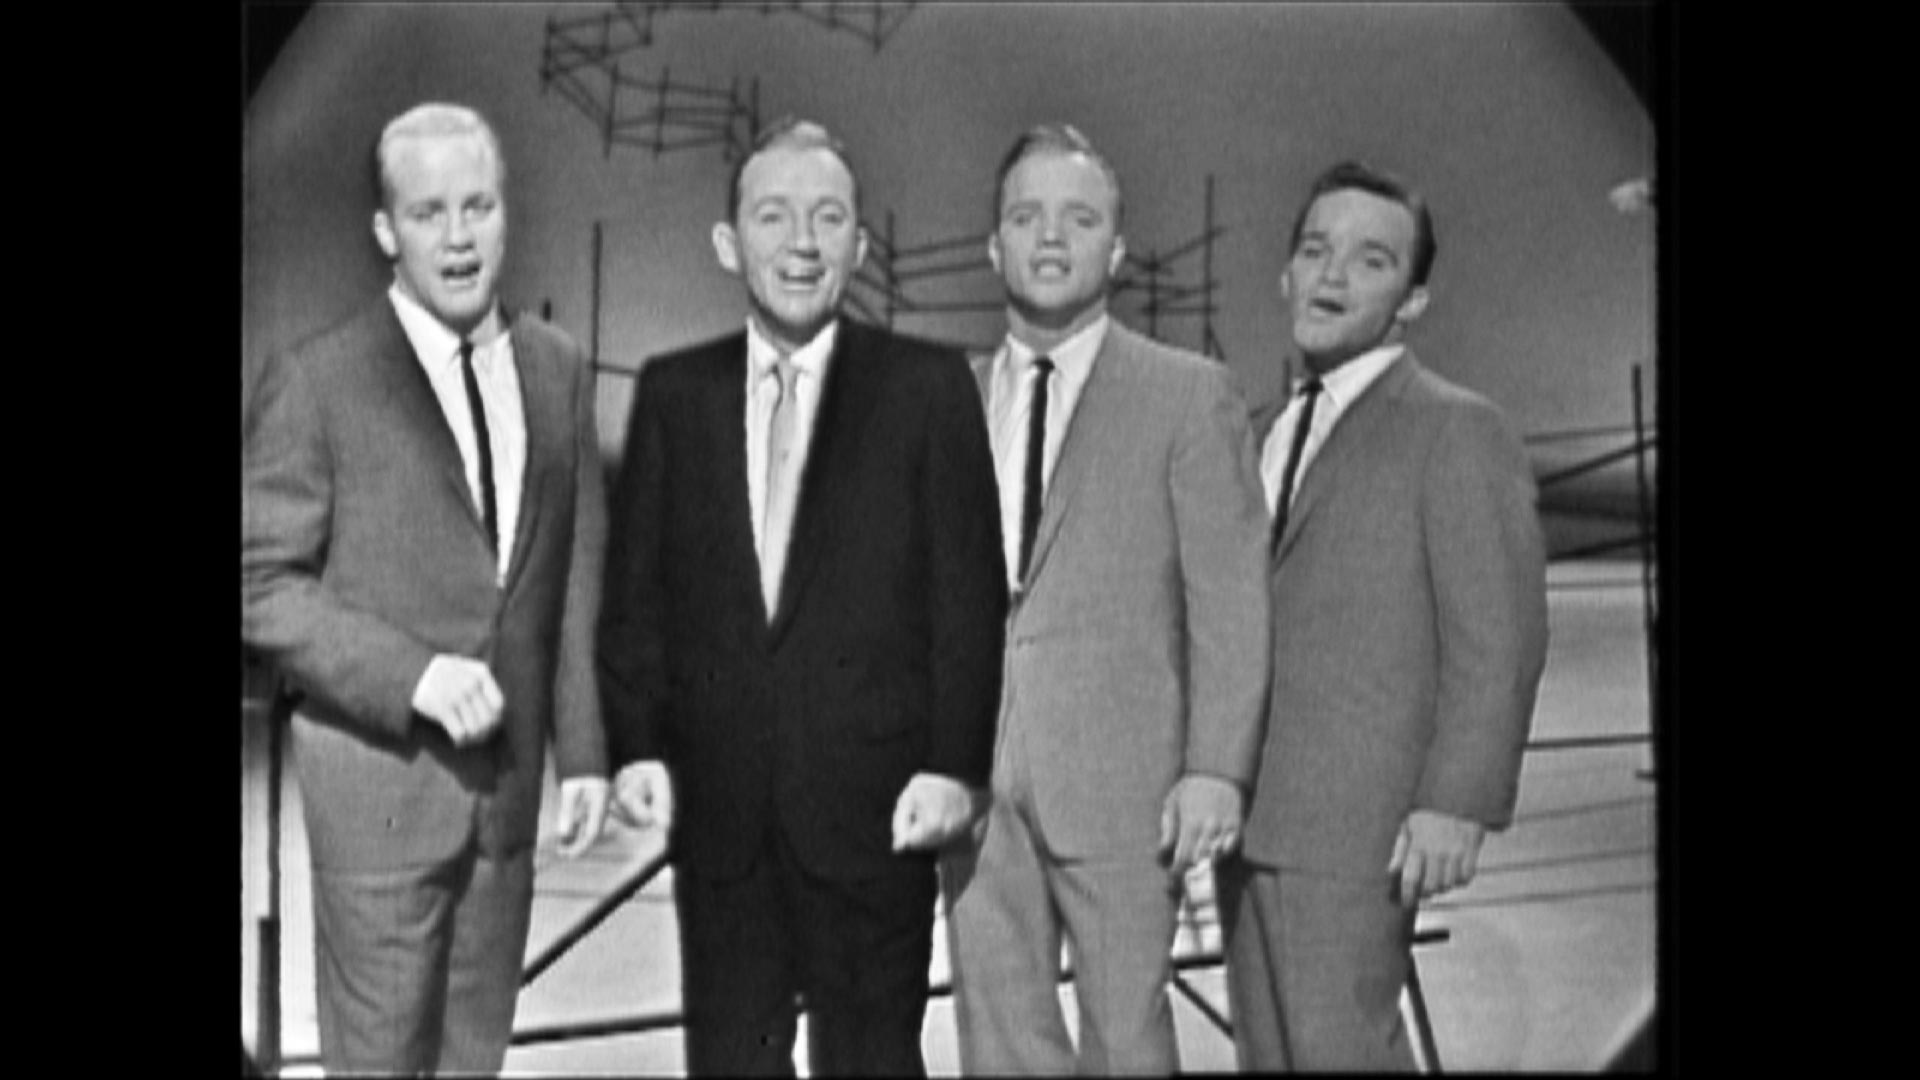 Bing Crosby Performance Bing Crosby and Sons Sing Together